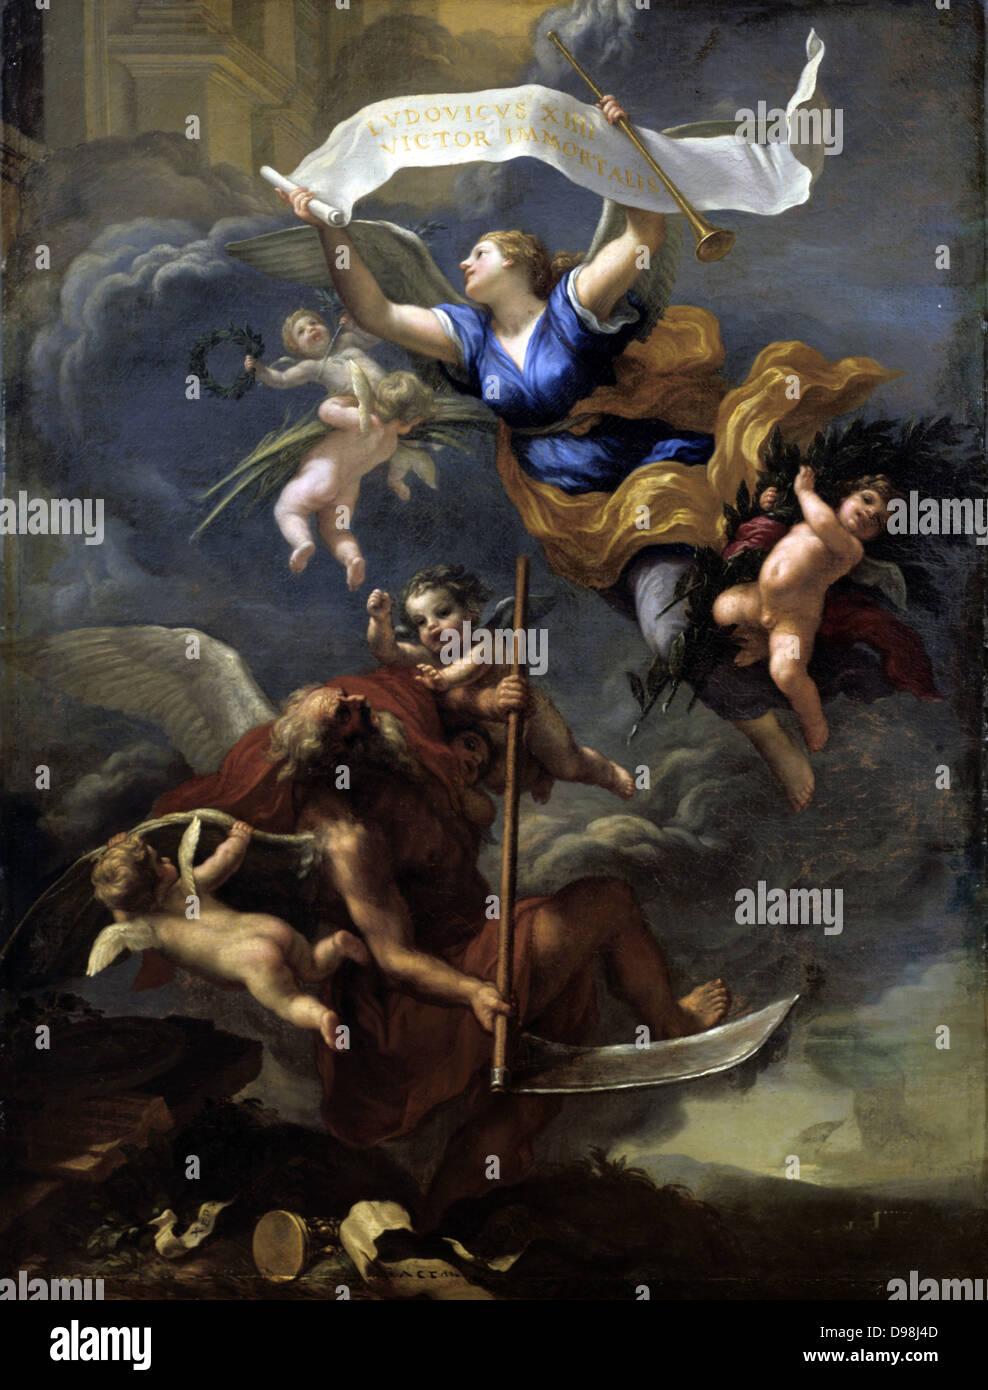 Glory of Louis XIV: Triumph of Time', alegorical painting by Baldassare Franceschini (1611-1689) called Il Volterrano, Italian Baroque painter. Stock Photo